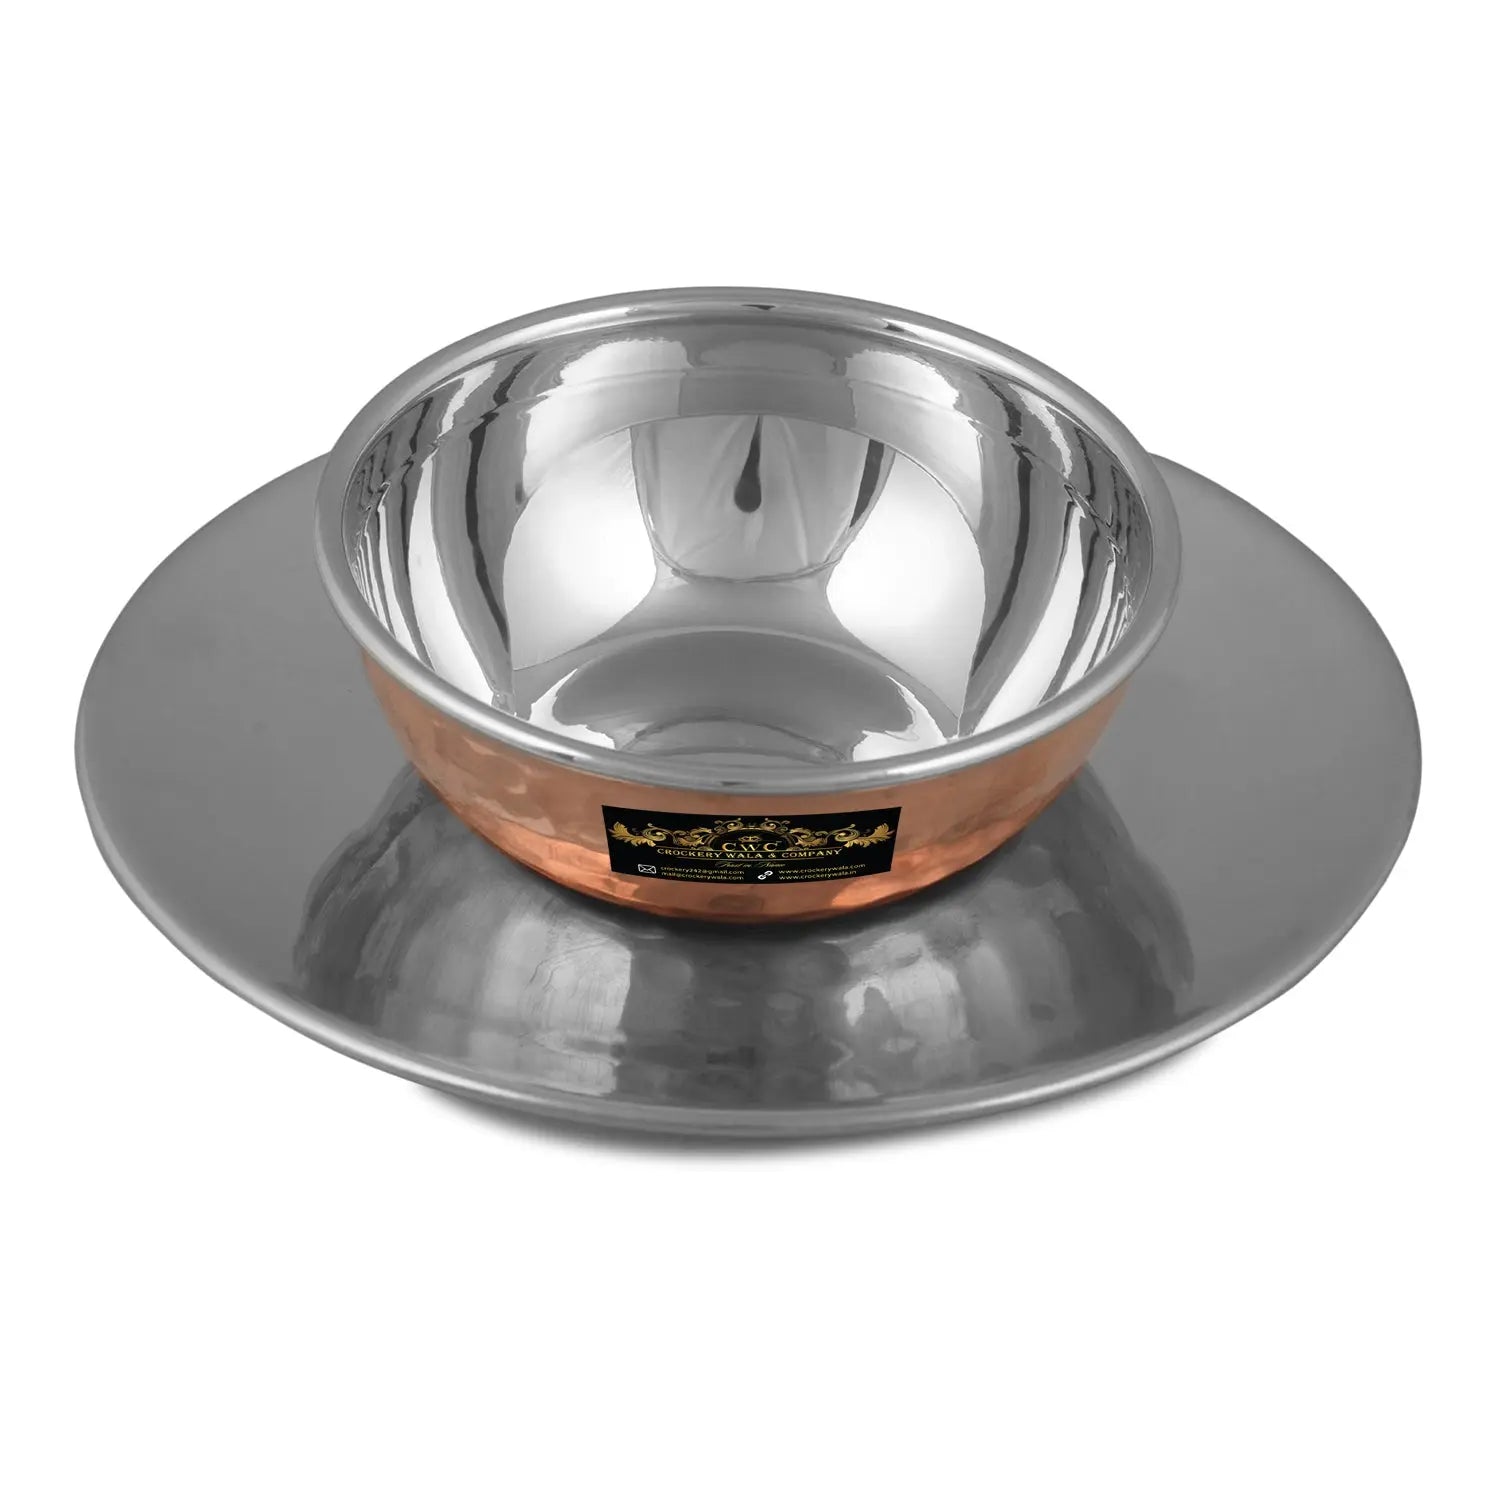 Crockery Wala And Company Copper Steel Finger Bowl Plate For Rinsing Fingers After Meal For Hotel & Restaurant - CROCKERY WALA AND COMPANY 